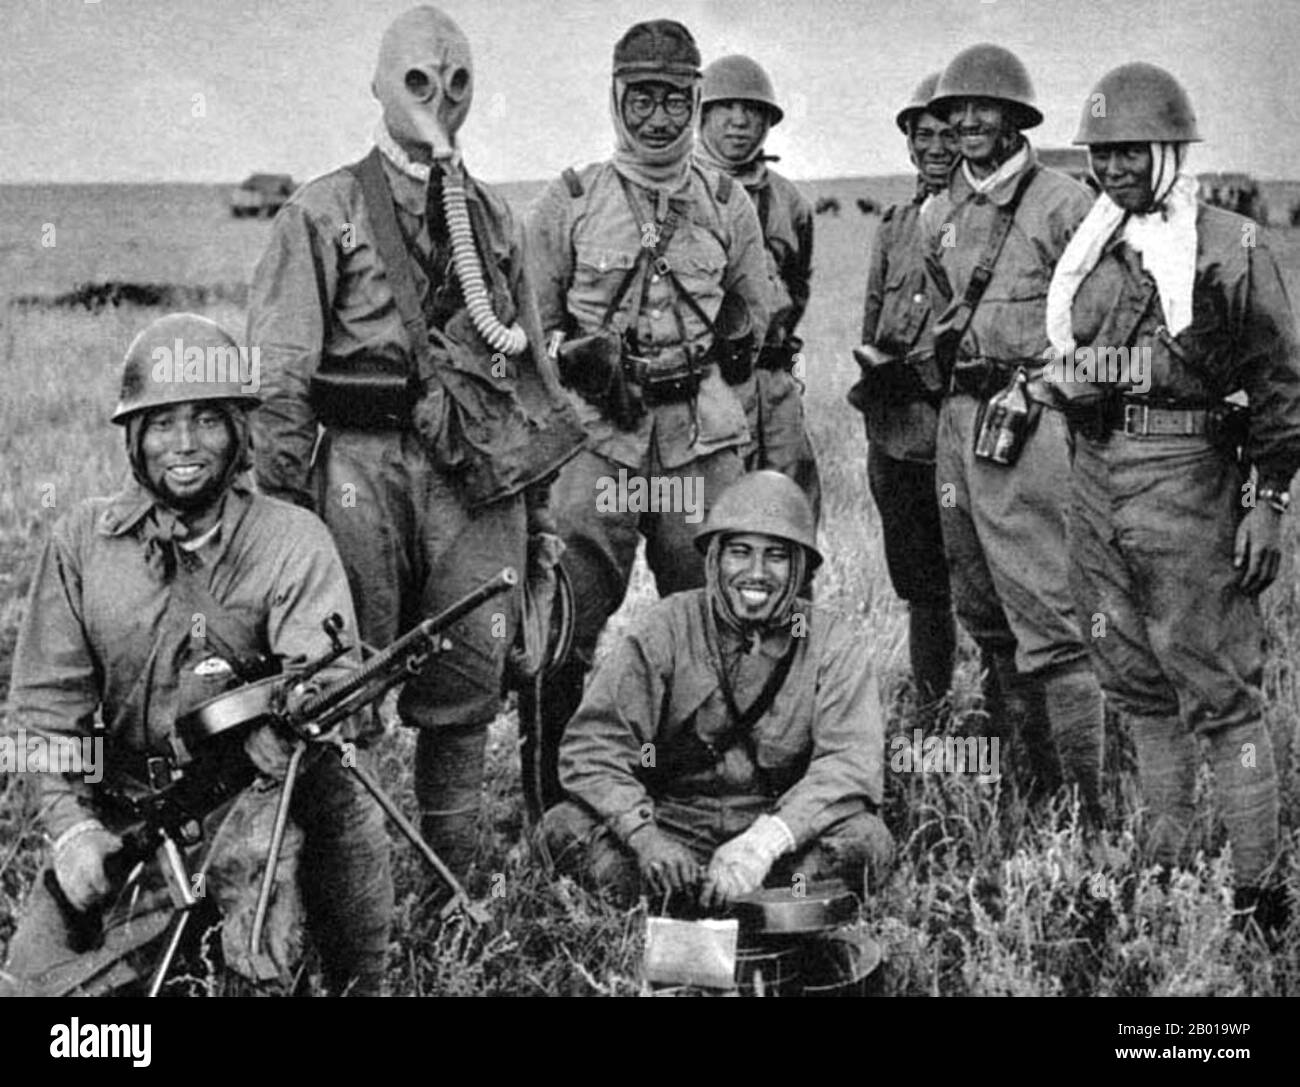 Mongolia: Soldiers of the Imperial Japanese Kwangtung Army posing at Khalkhin Gol, 1939.  The Battles of Khalkhin Gol were the decisive engagements of the undeclared Soviet-Japanese Border War fought between the Soviet Union, Mongolia and Japan in 1939. They were named after the river Khalkhin Gol, which passes through the battlefield. In Japan, the decisive battle of the conflict is known as the Nomonhan Incident (Nomonhan Jiken) after a nearby village, and was a total defeat for their army. Stock Photo